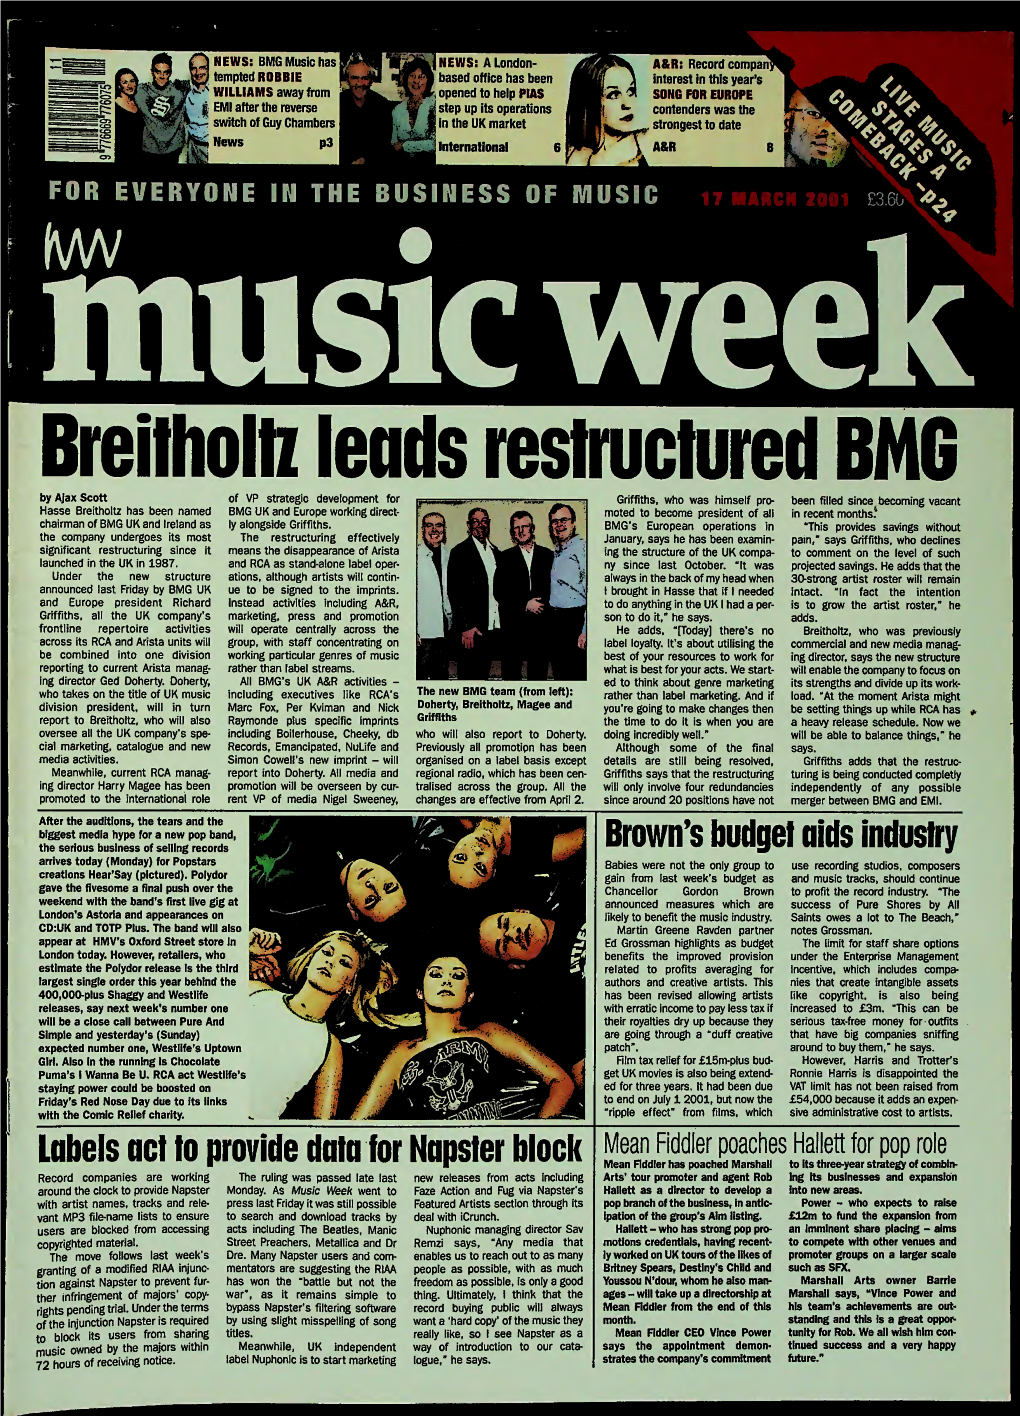 Breitholli Leads Reslruclured BM6 by Ajax Scott Hasse Breitholtz Bas Been Namec Chairman of BMG UK and Ireland As the Company Un